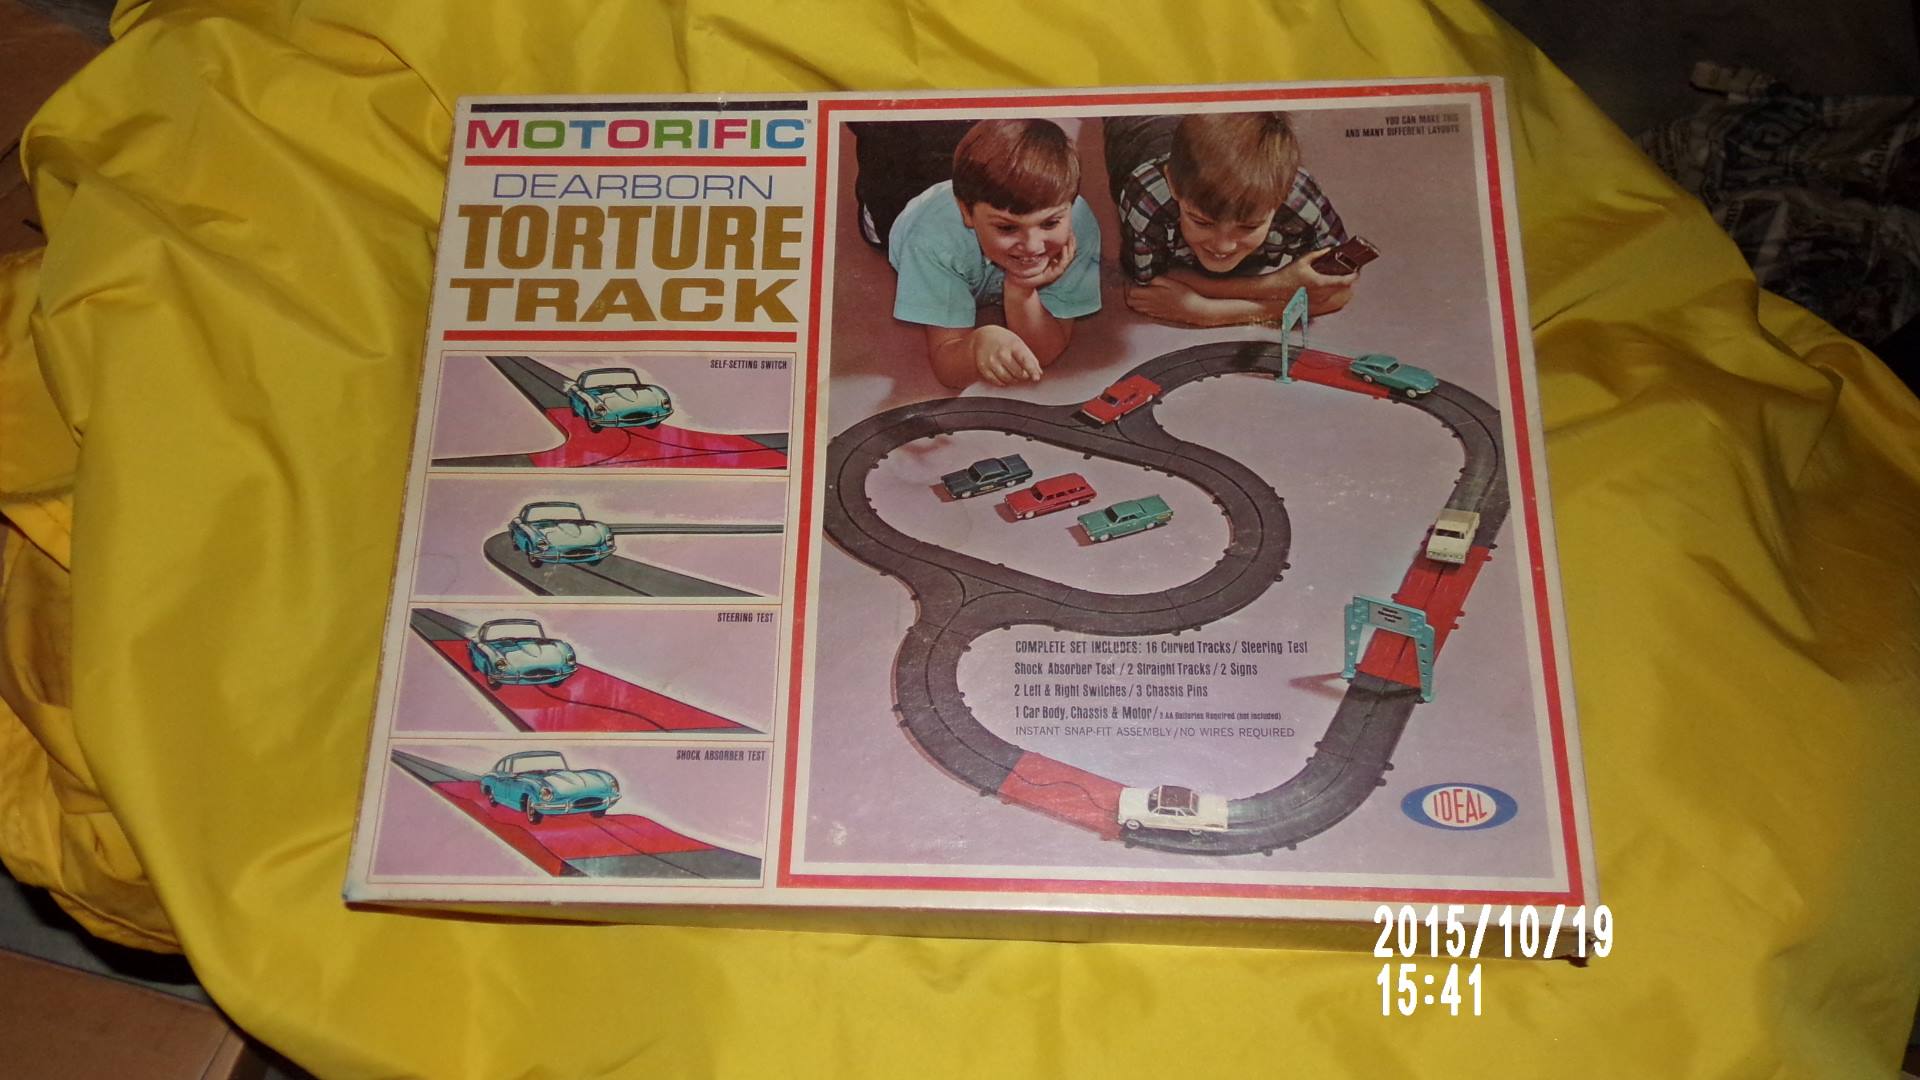 Motorific Dearborn Torture Track Selfsetting Switch Steering Test Complete Set Includes 16 Curved TracksSleering Test Shock Absorber Test 2 Straight Tracks2 Signs 2 Left & Right Switches3 Chassis Pins 1 Car Body. Chassis & Motor1 Tur tired cunt inclus…